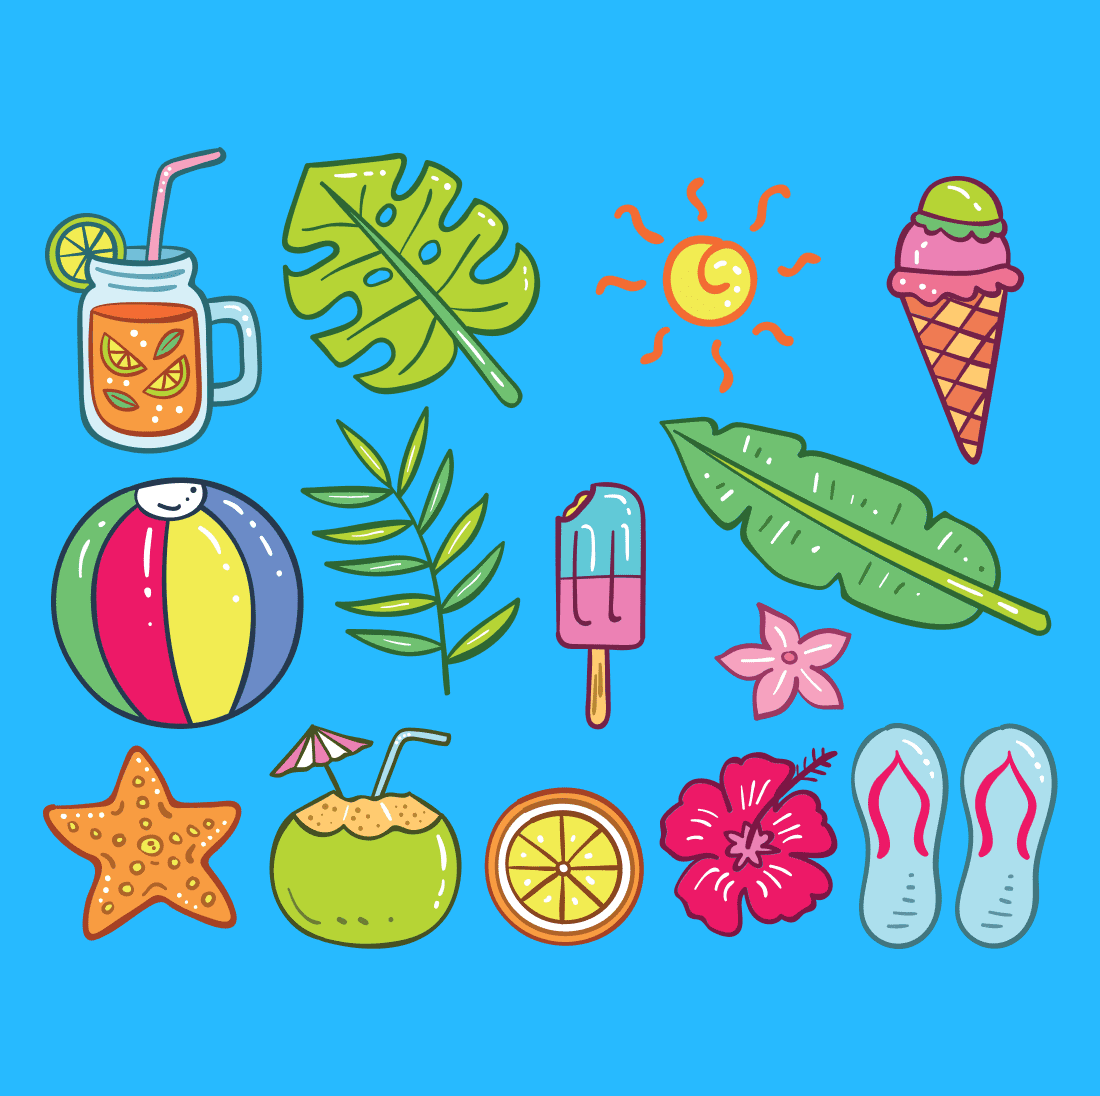 SVG image of a colored ball, summer shoes, ice cream, etc.